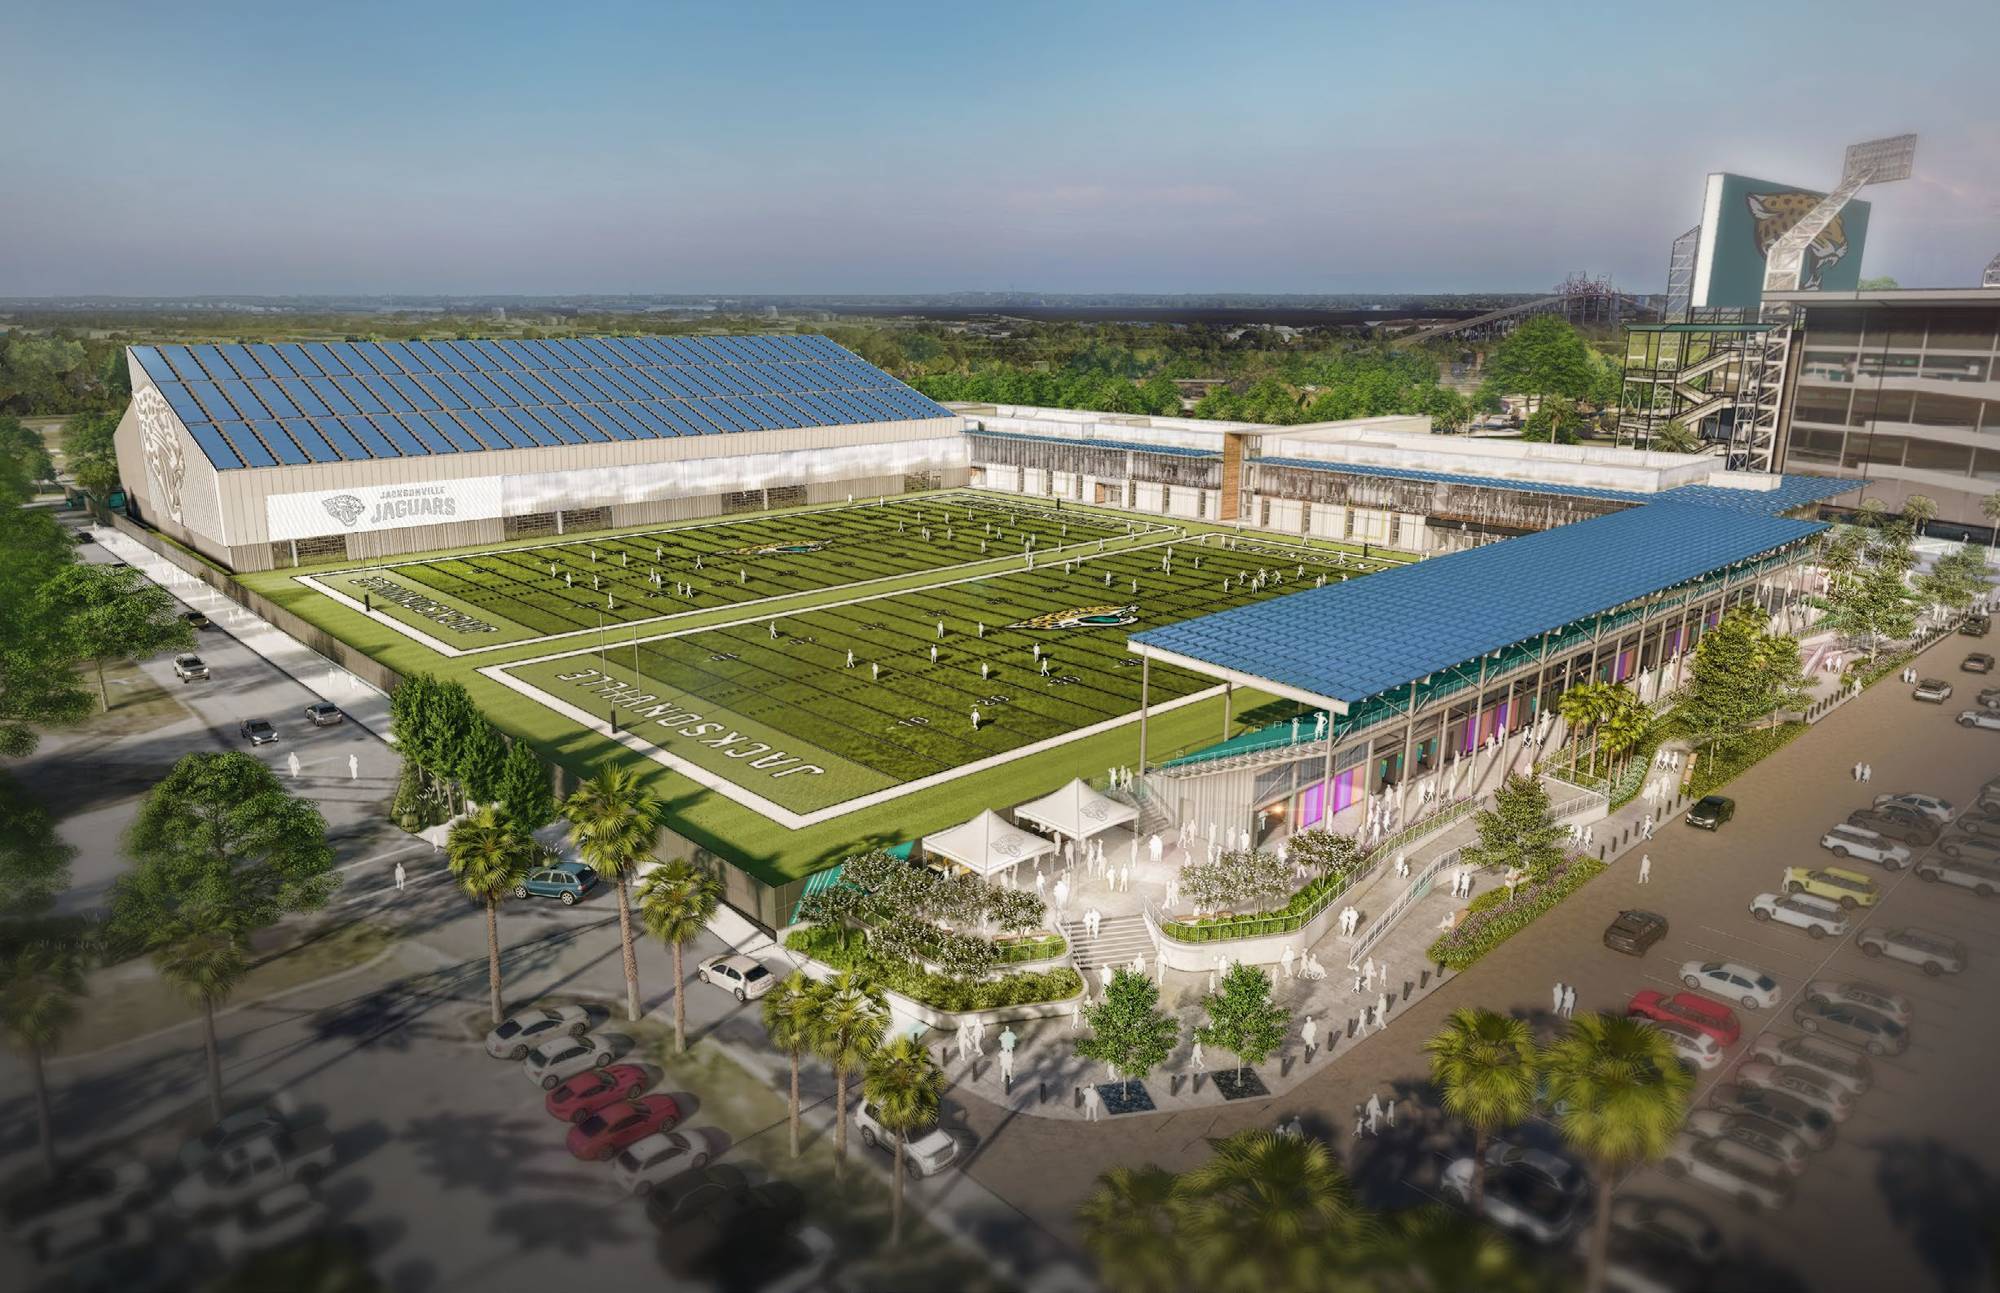 Special to the Daily Record: An artist's rendering of the Jacksonville Jaguars training facility the Miller Electric Center is expected to open in 2023.